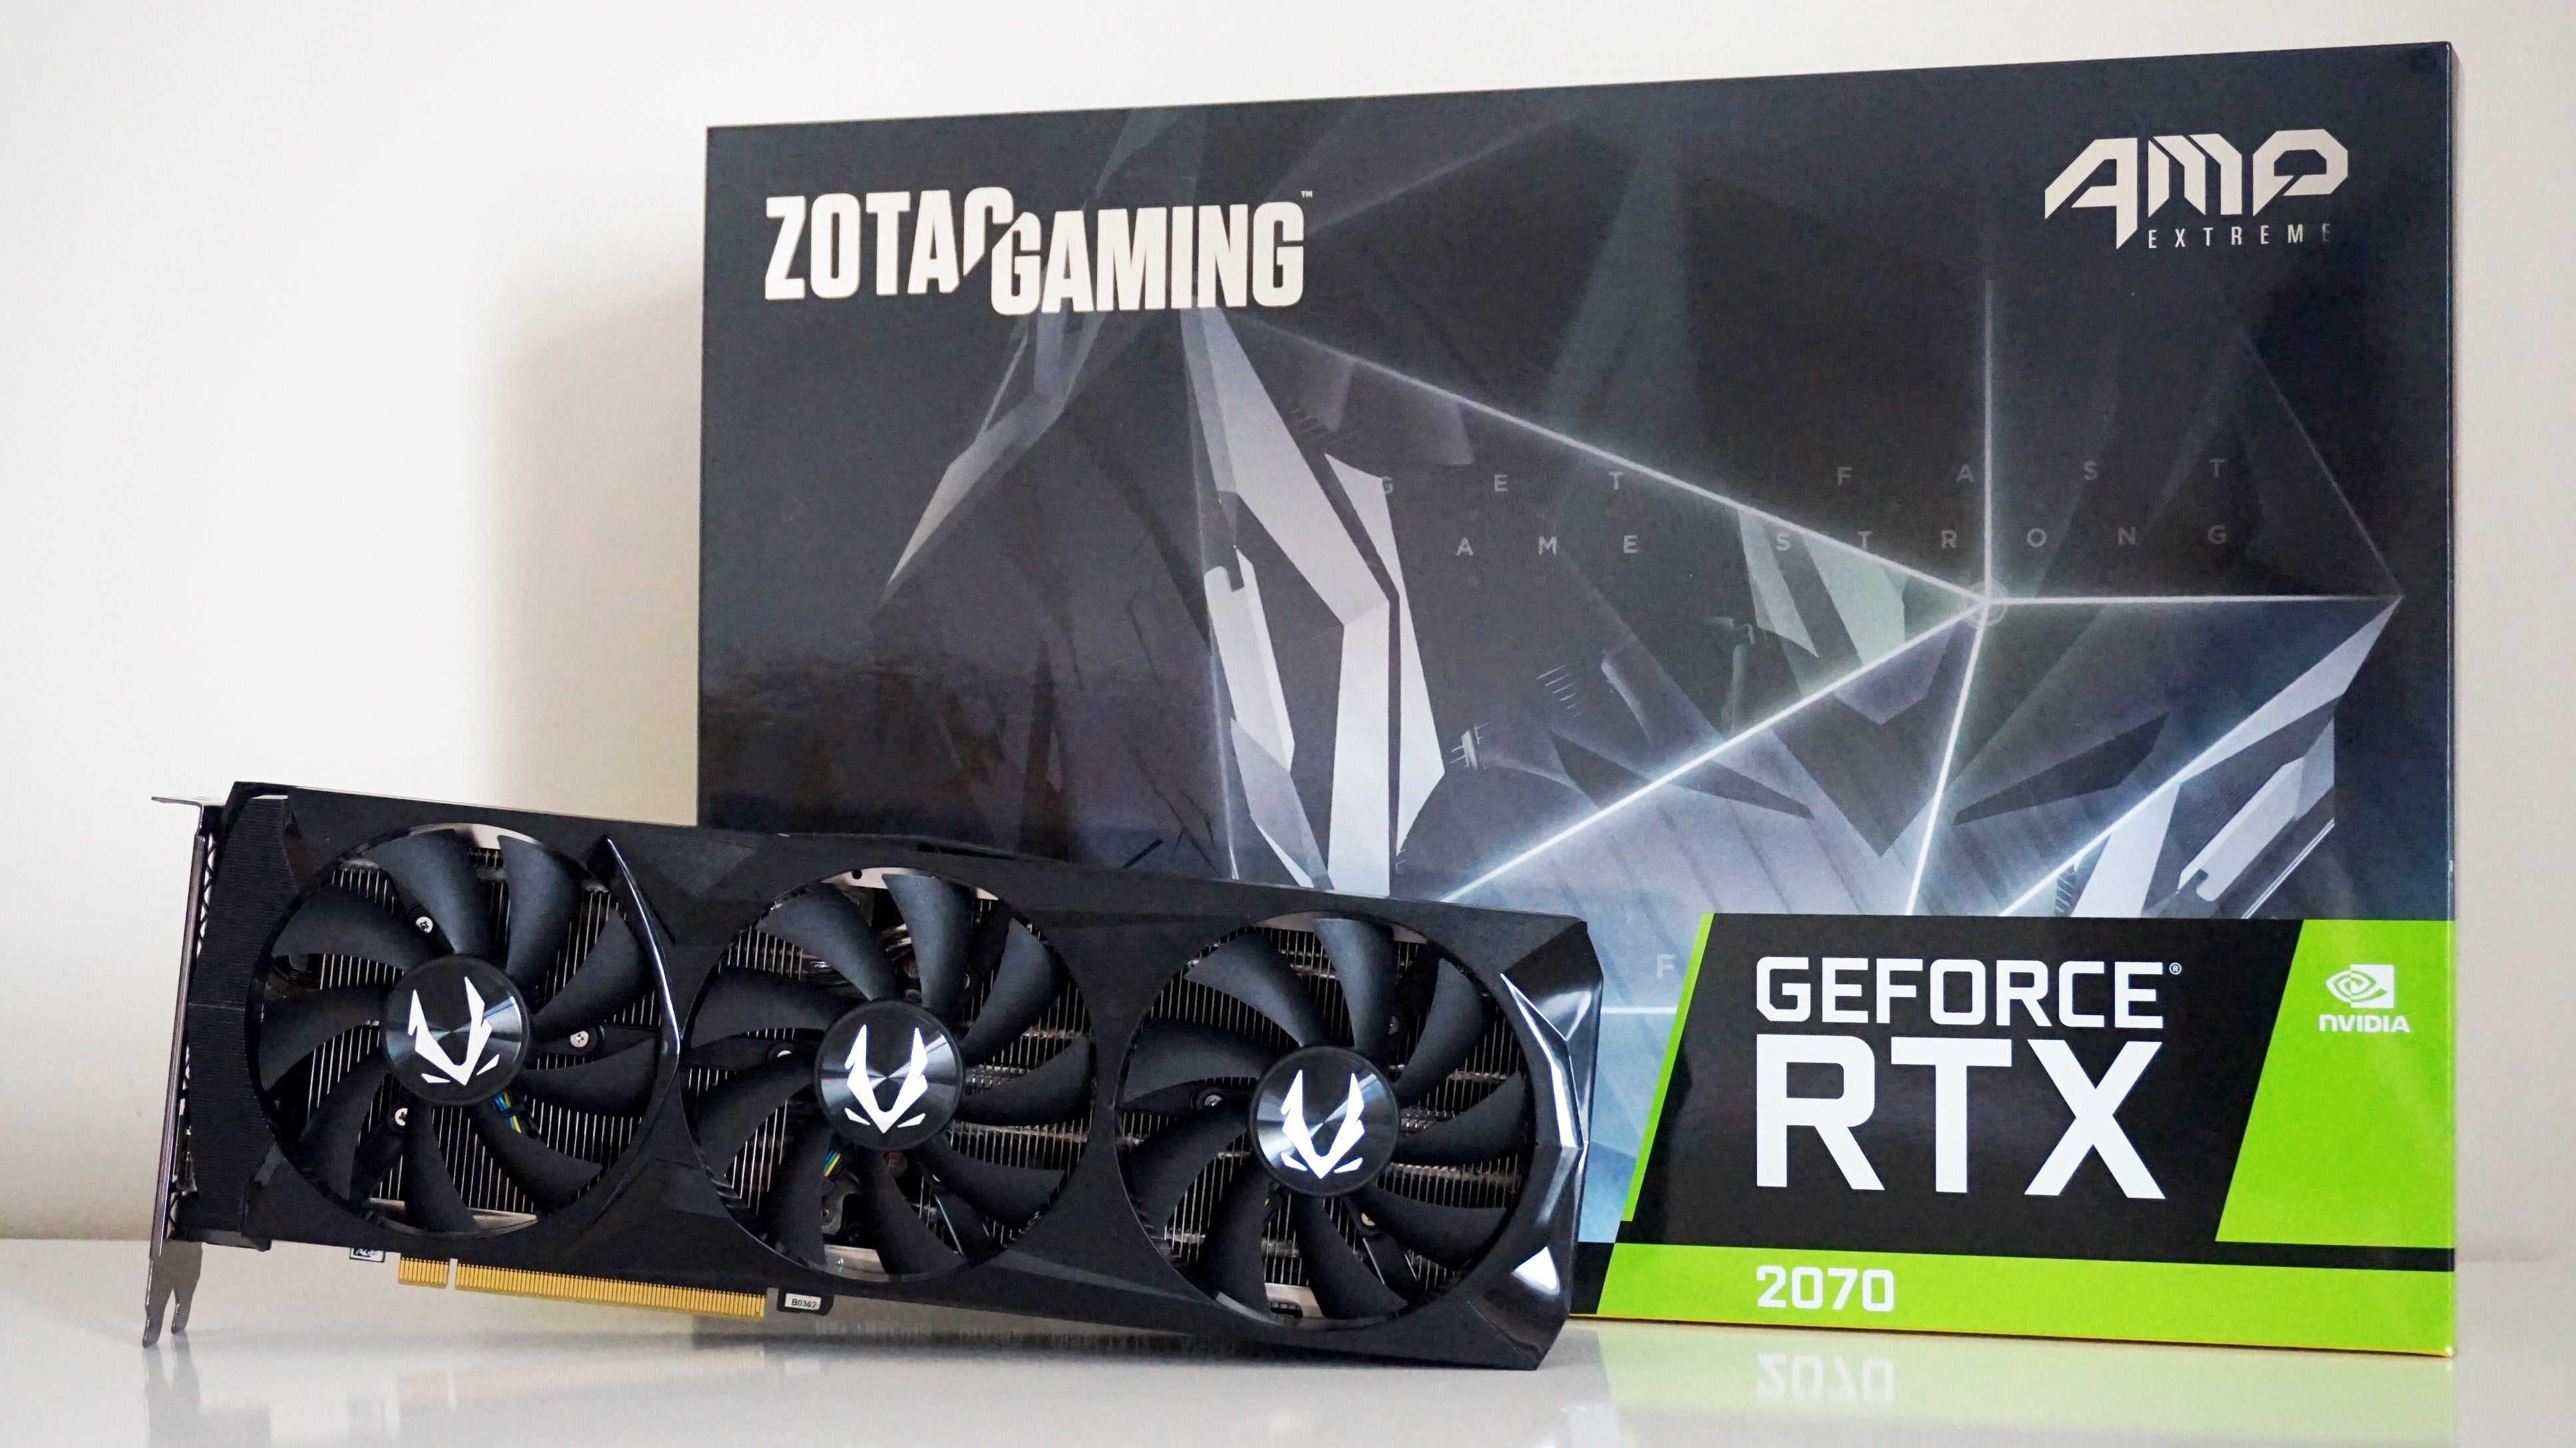 Nvidia GeForce RTX 2070 review: Better than the GTX 1080 | Rock